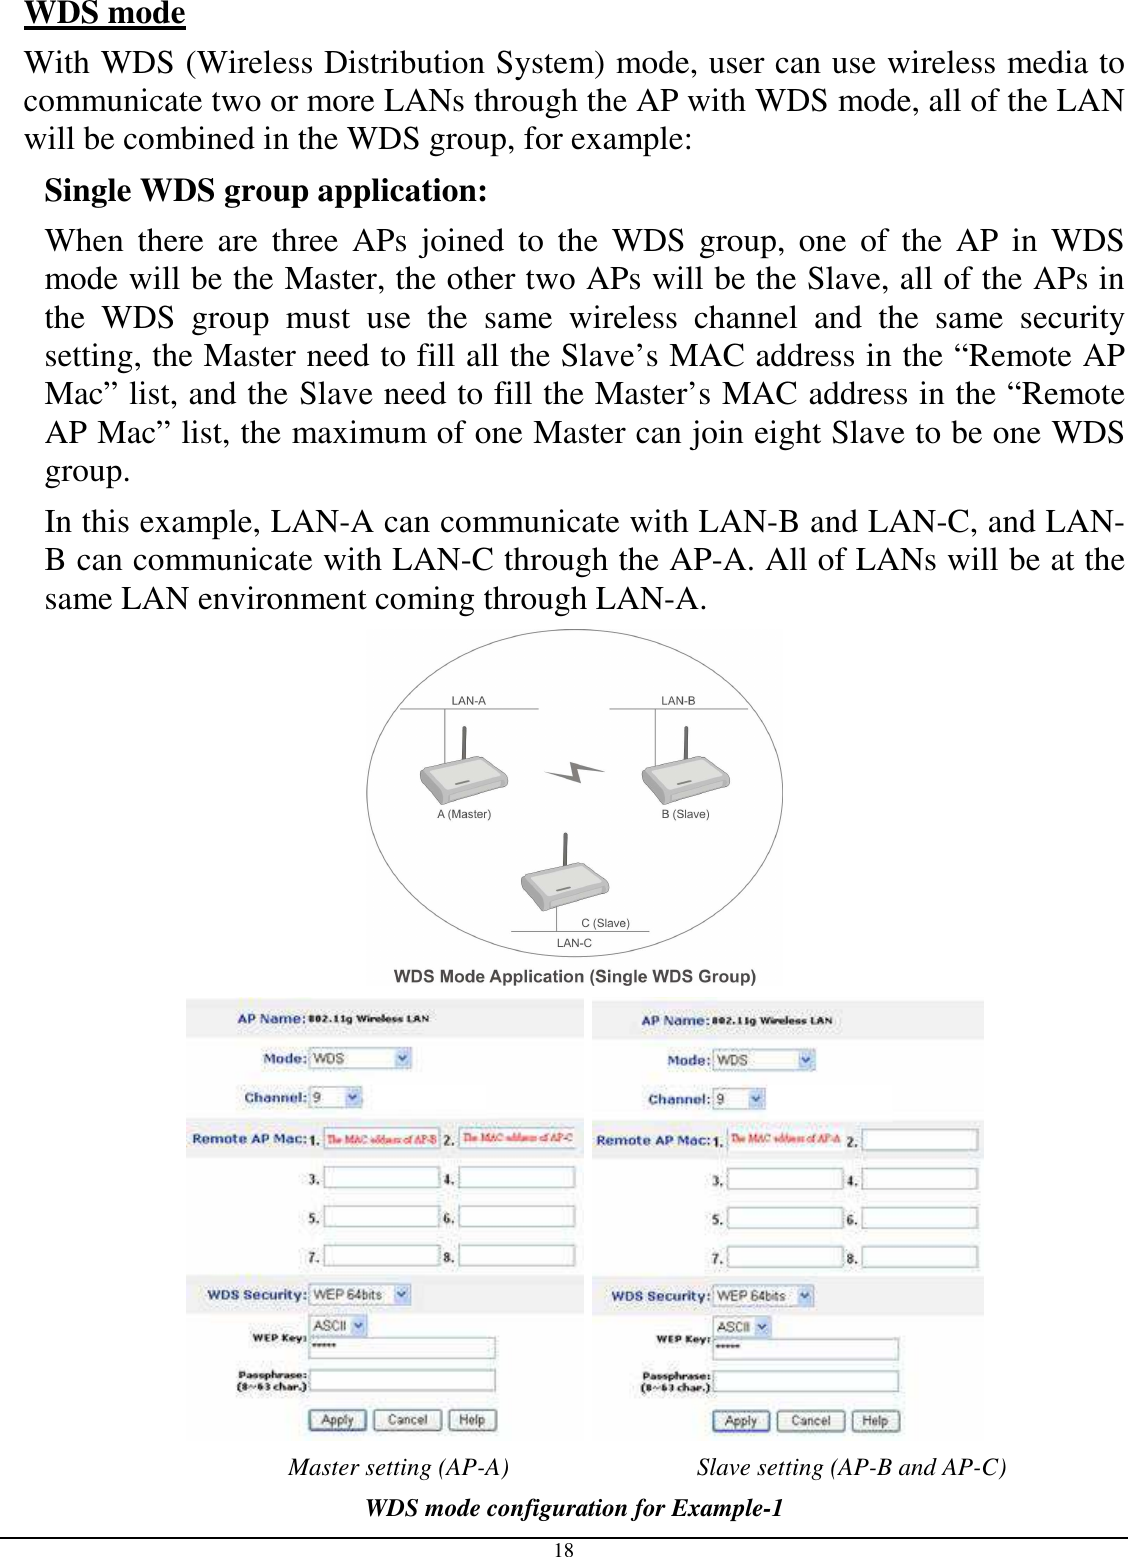  18 WDS mode  With WDS (Wireless Distribution System) mode, user can use wireless media to communicate two or more LANs through the AP with WDS mode, all of the LAN will be combined in the WDS group, for example: Single WDS group application: When  there  are  three  APs  joined  to  the  WDS  group,  one  of  the  AP  in  WDS mode will be the Master, the other two APs will be the Slave, all of the APs in the  WDS  group  must  use  the  same  wireless  channel  and  the  same  security setting, the Master need to fill all the Slave’s MAC address in the “Remote AP Mac” list, and the Slave need to fill the Master’s MAC address in the “Remote AP Mac” list, the maximum of one Master can join eight Slave to be one WDS group. In this example, LAN-A can communicate with LAN-B and LAN-C, and LAN-B can communicate with LAN-C through the AP-A. All of LANs will be at the same LAN environment coming through LAN-A.      Master setting (AP-A)                              Slave setting (AP-B and AP-C) WDS mode configuration for Example-1 